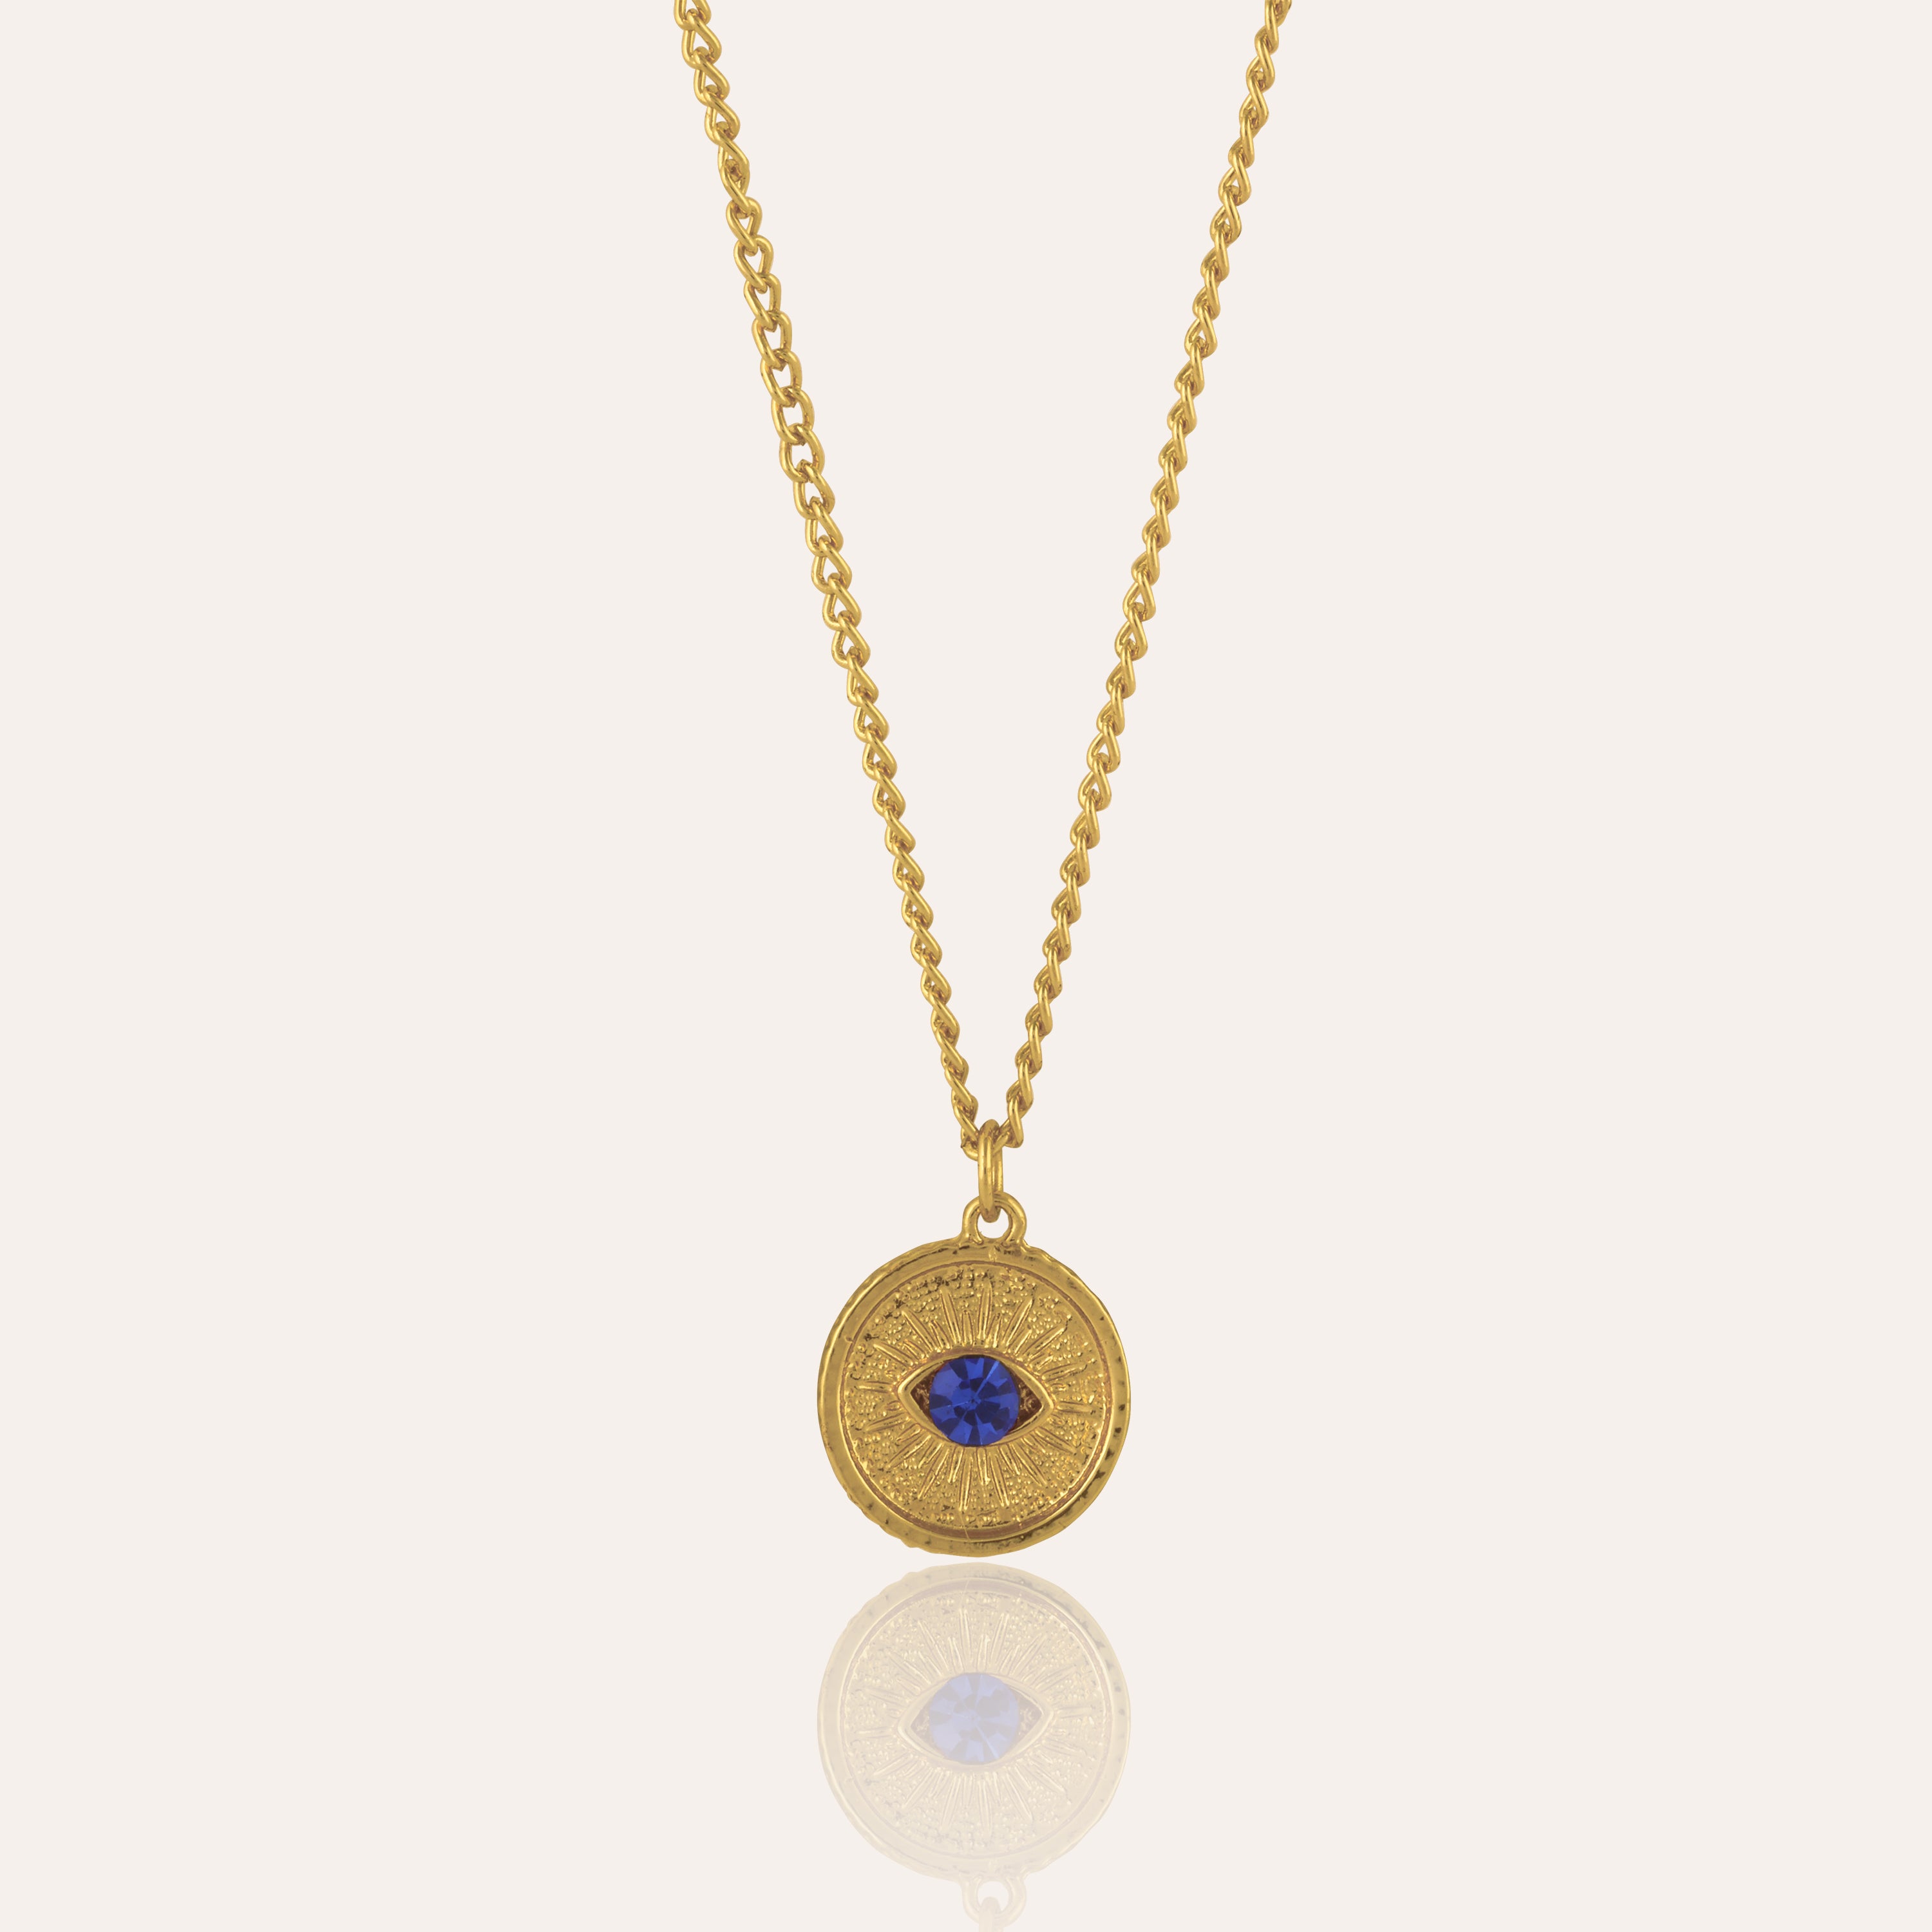 TFC Metal Evil Eye Gold Plated Necklace-Enhance your elegance with our collection of gold-plated necklaces for women. Choose from stunning pendant necklaces, chic choker necklaces, and trendy layered necklaces. Our sleek and dainty designs are both affordable and anti-tarnish, ensuring lasting beauty. Enjoy the cheapest fashion jewellery, lightweight and stylish- only at The Fun Company.